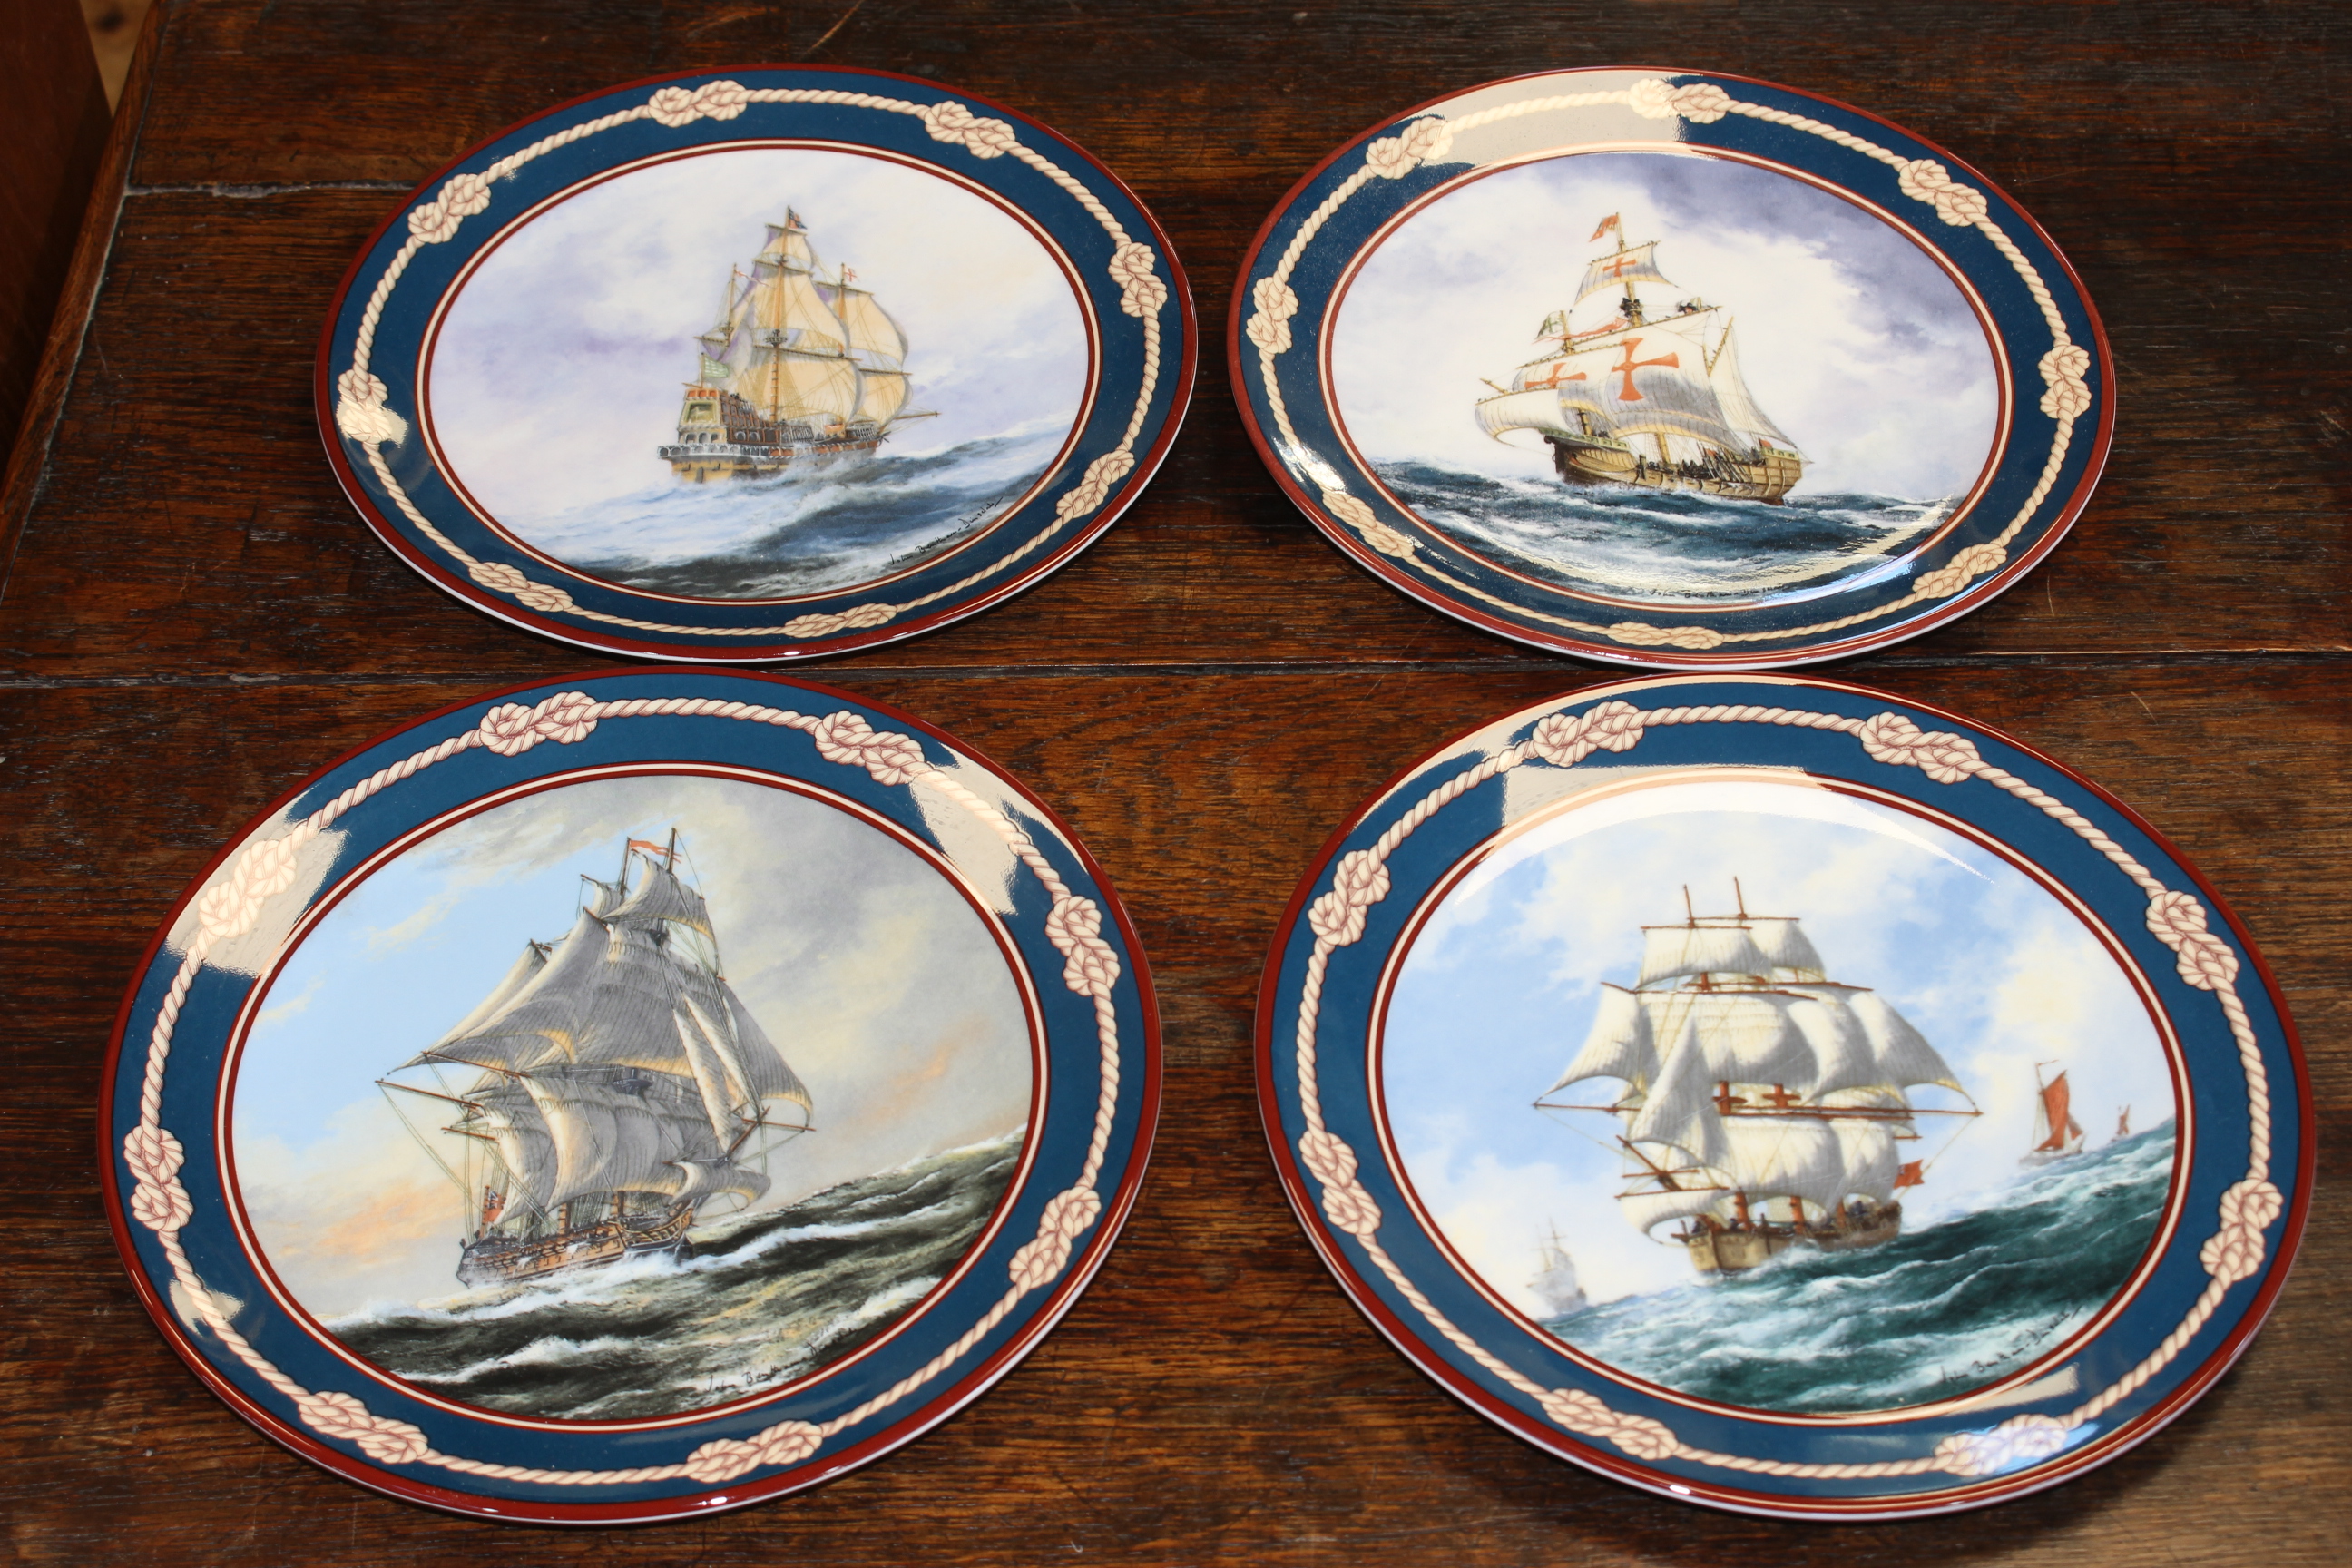 Arklow Patricia decorative coffee set, Laurence R. Watson & Co box, plates, etc. - Image 2 of 3